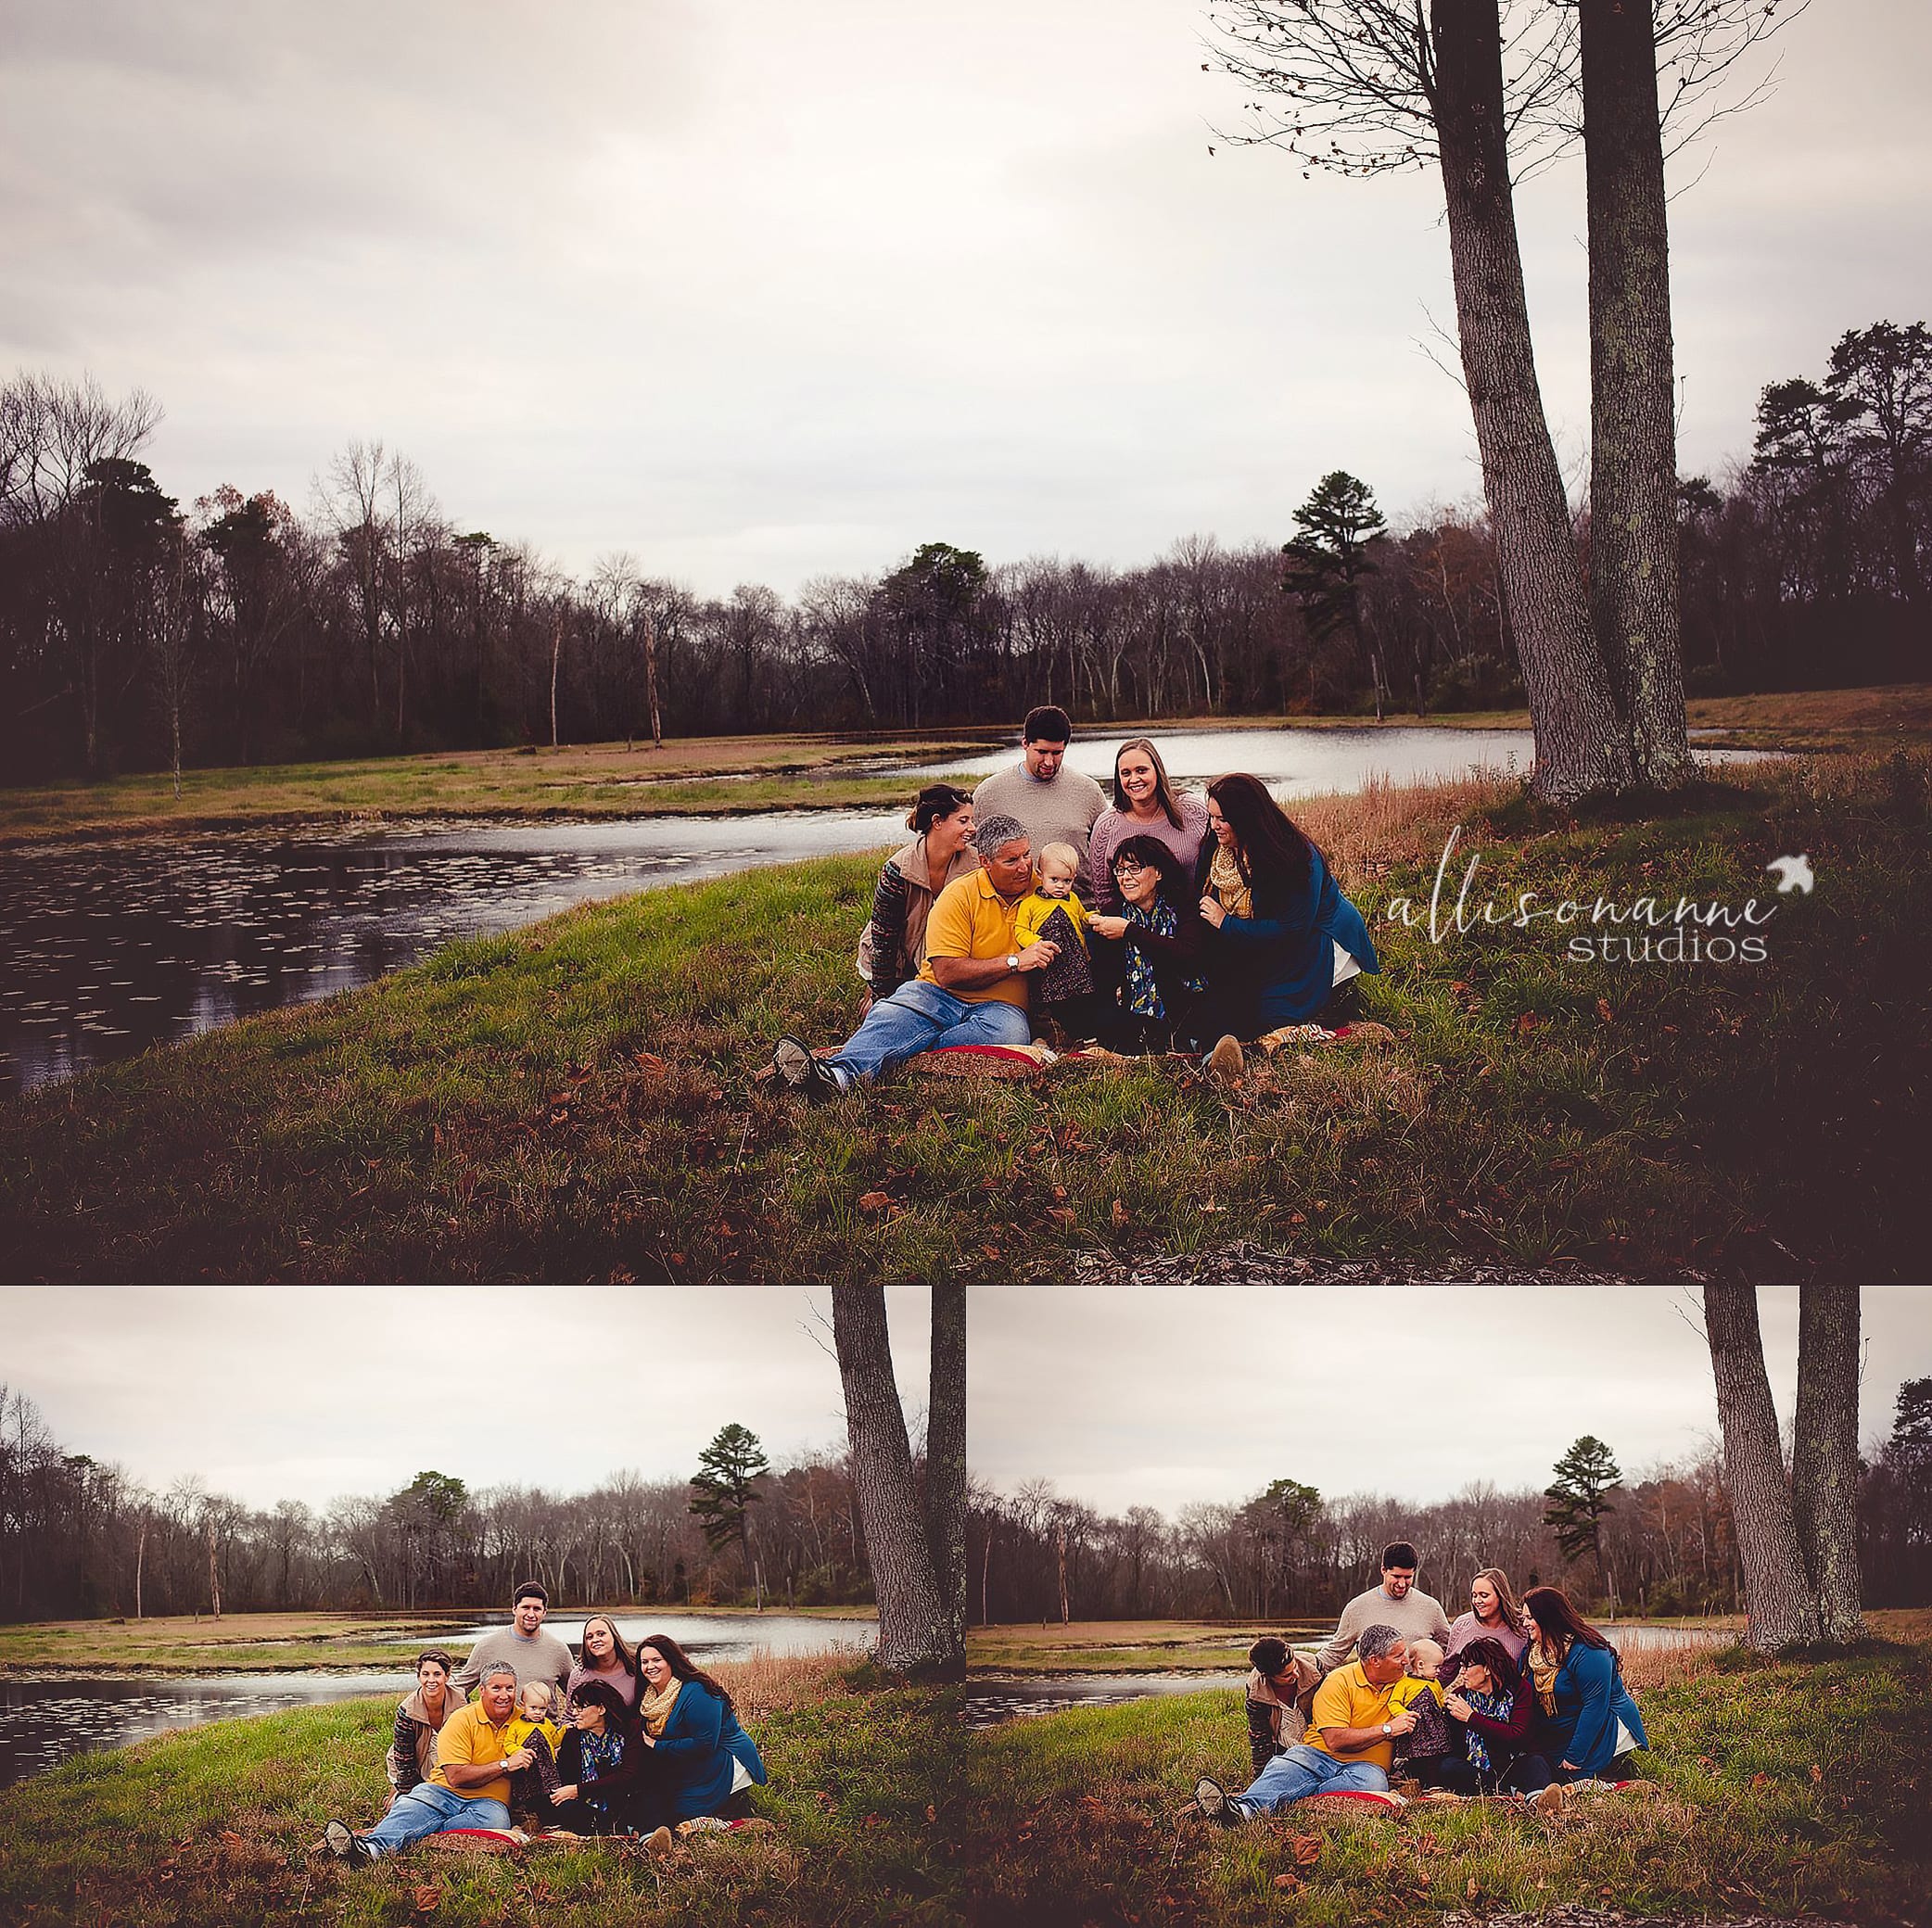 Allison Gallagher, AllisonAnne Studios, South Jersey, Family Photography, Hammonton, Pottery Barn Kids, multi-generational, Grandmom is cool, First Year Journey, Callie, love, outdoors